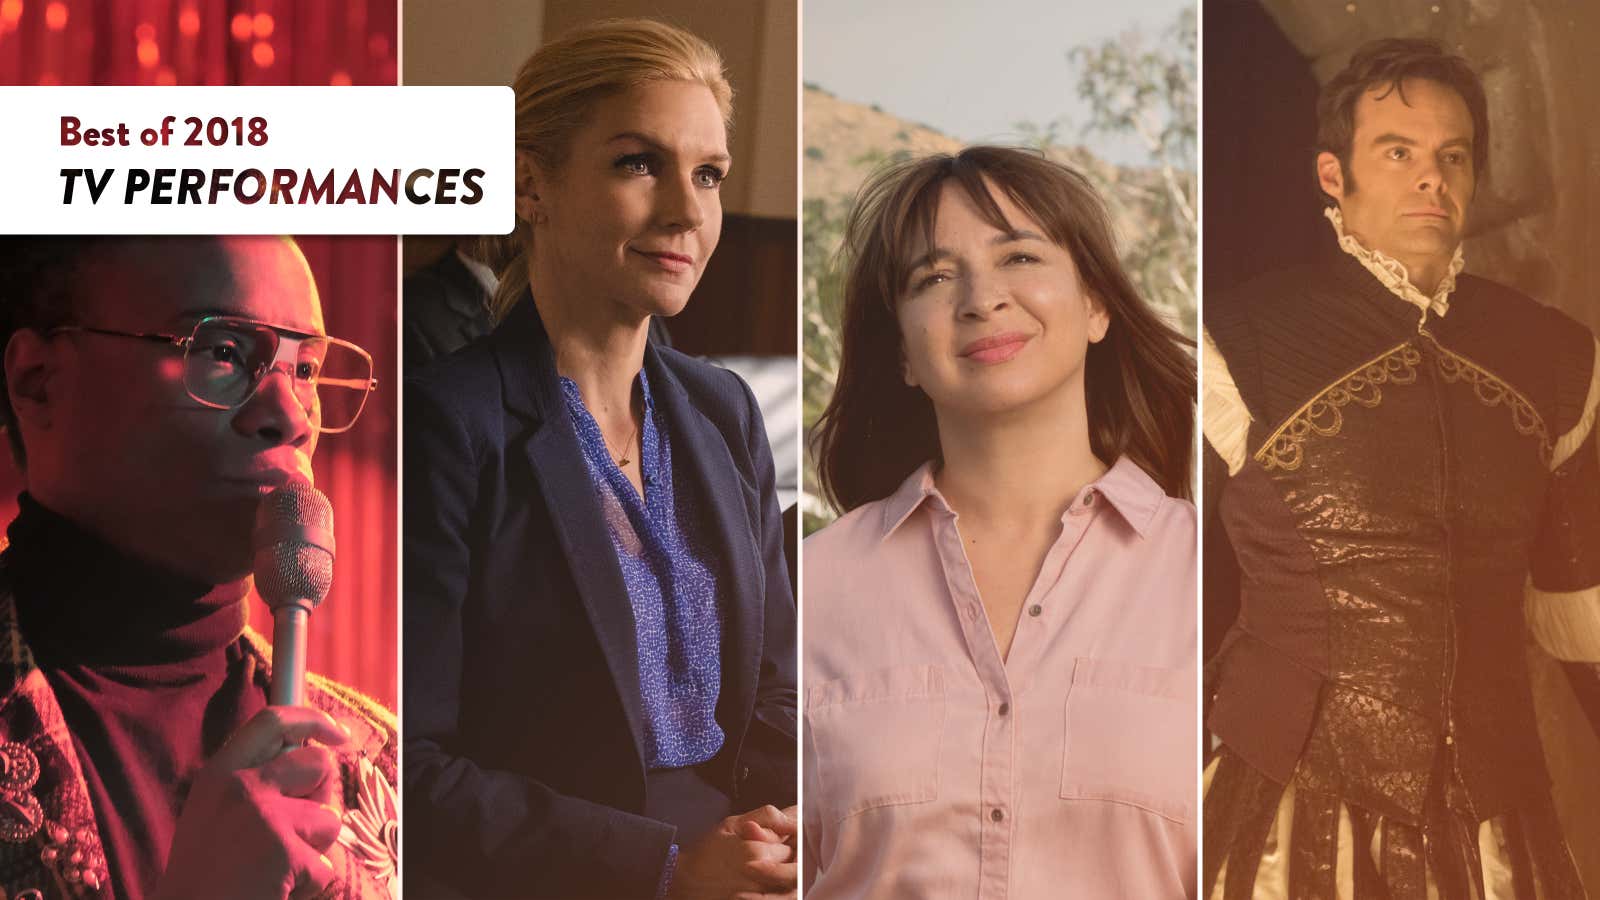 The best TV performances of 2018